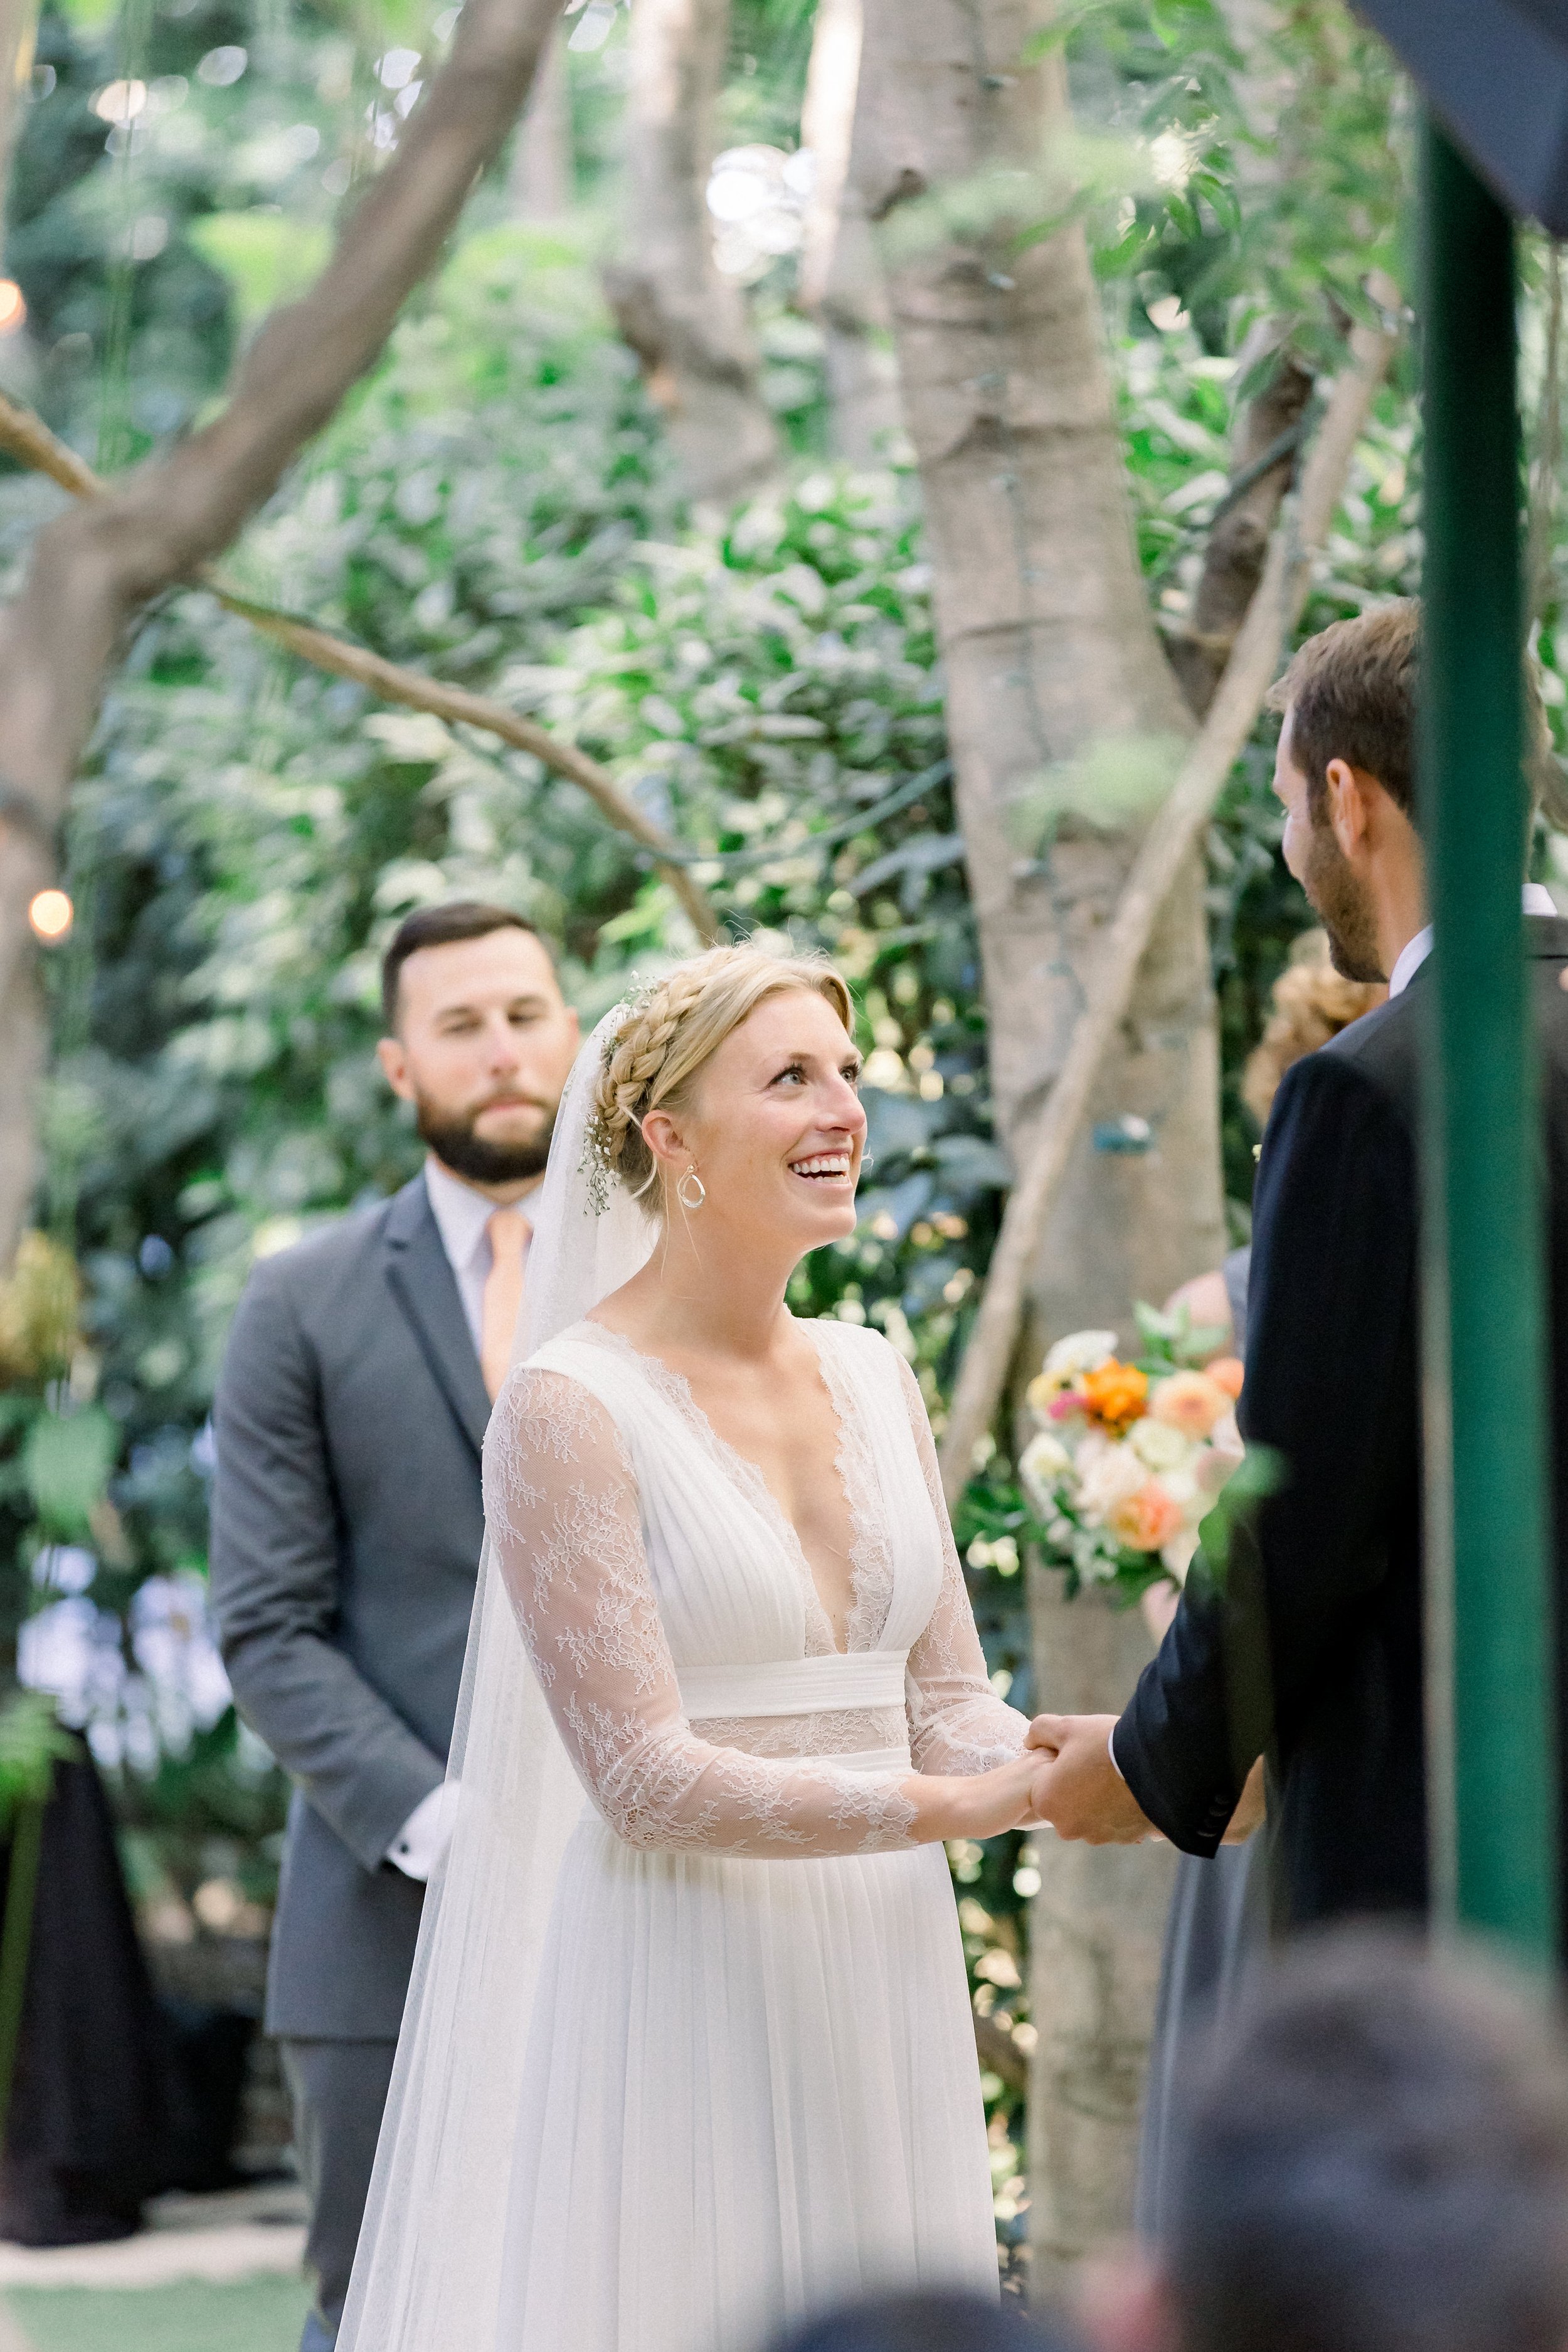 bride and groom tie the knot in simi valley at fairytale, whimsical venue, hartley botanica